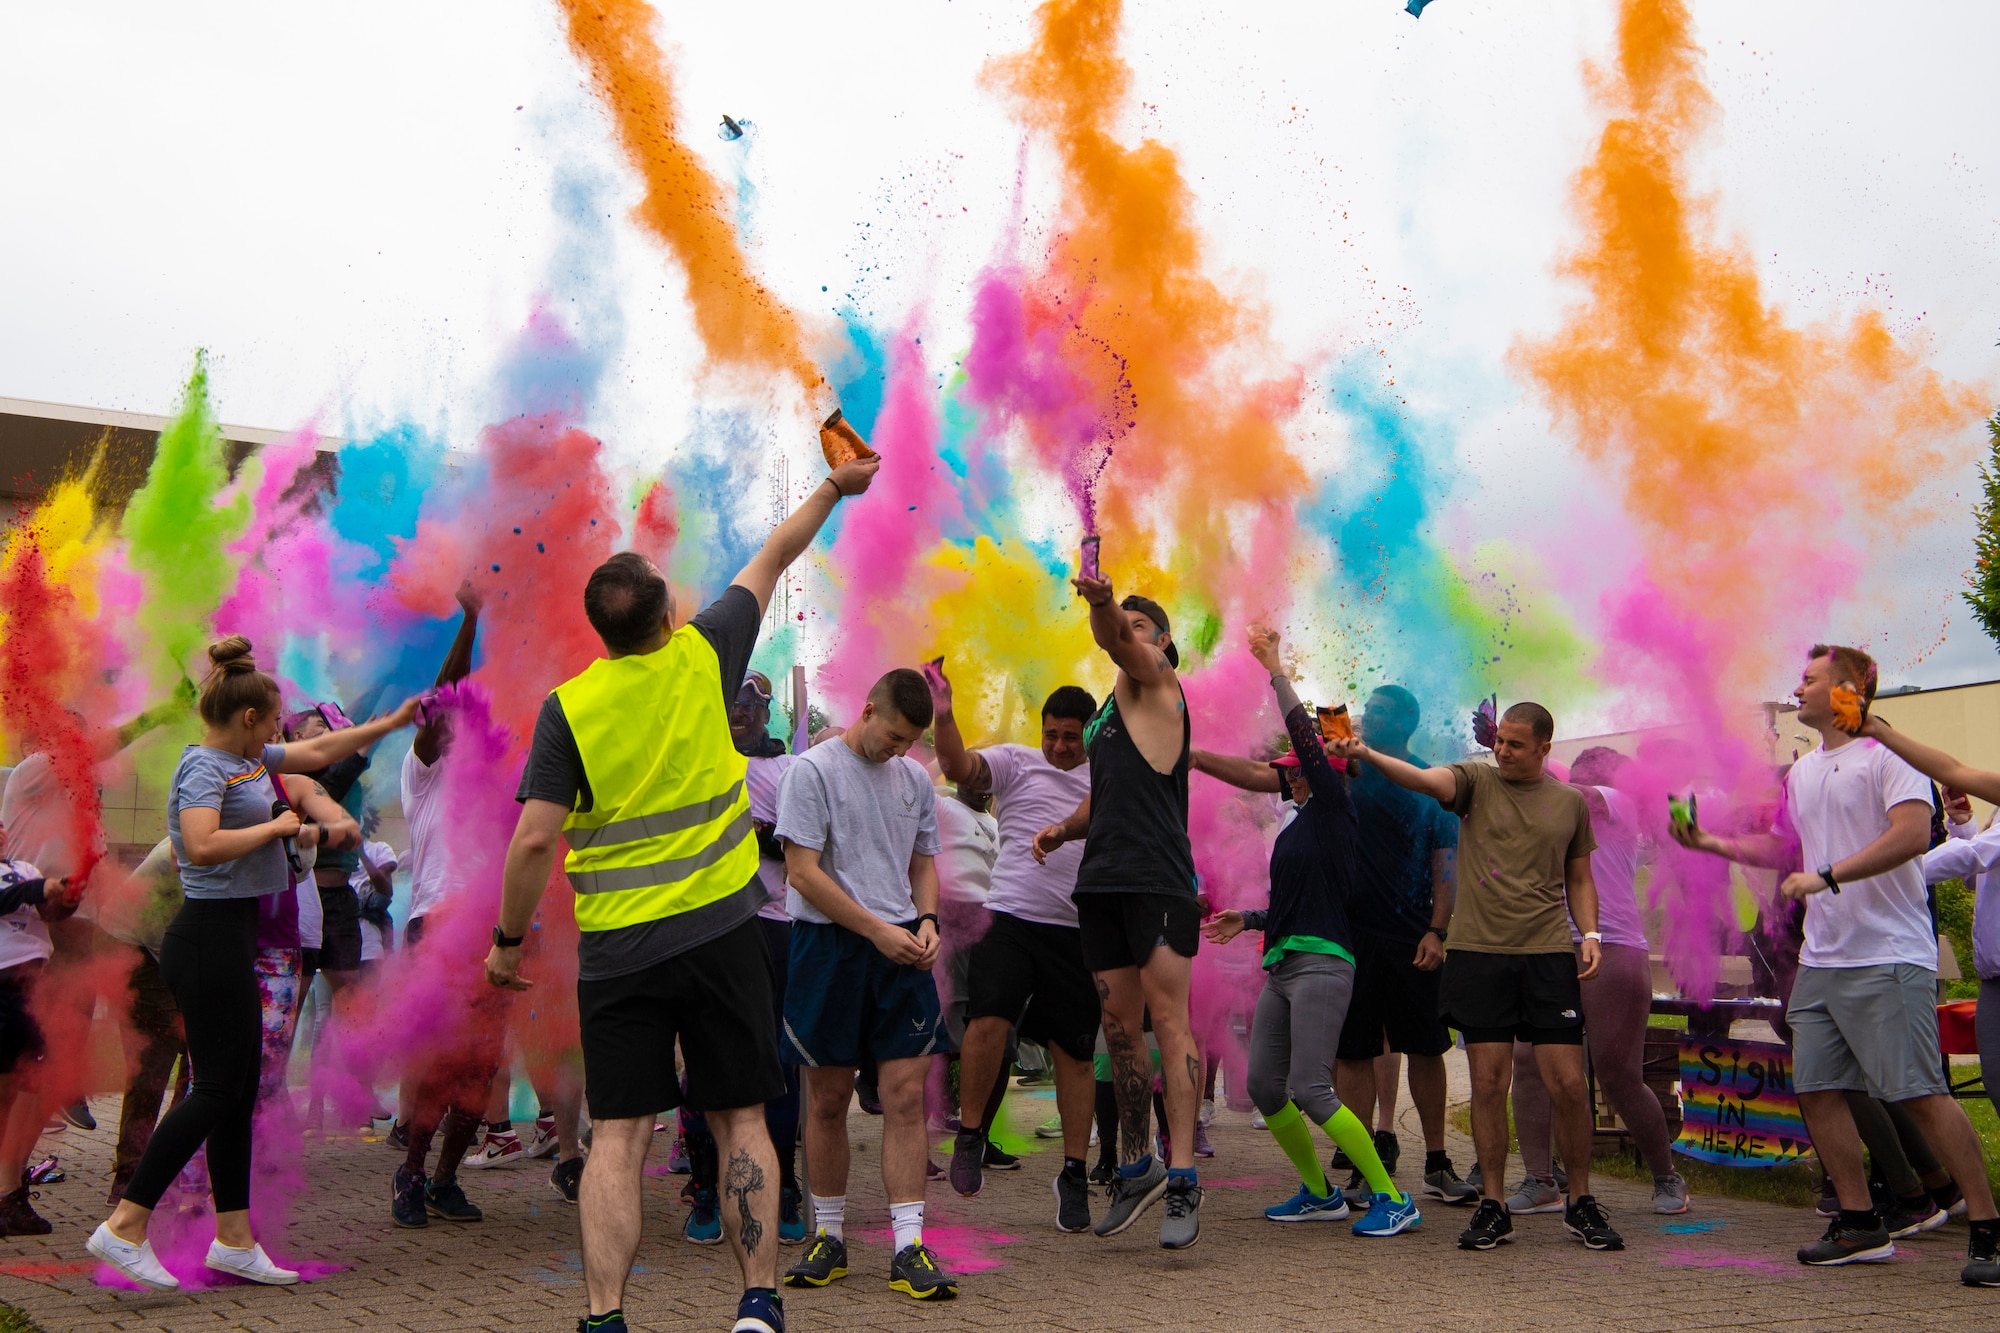 Members from the 52nd Fighter Wing participate in a Pride color run June 30, 2021, on Spangdahlem Air Base, Germany. Held in June each year, Pride Month was established to recognize the equality and increased visibility of the lesbian, gay, bisexual, transgender and queer  community. (U.S. Air Force photo by Staff Sgt. Melody W. Howley)